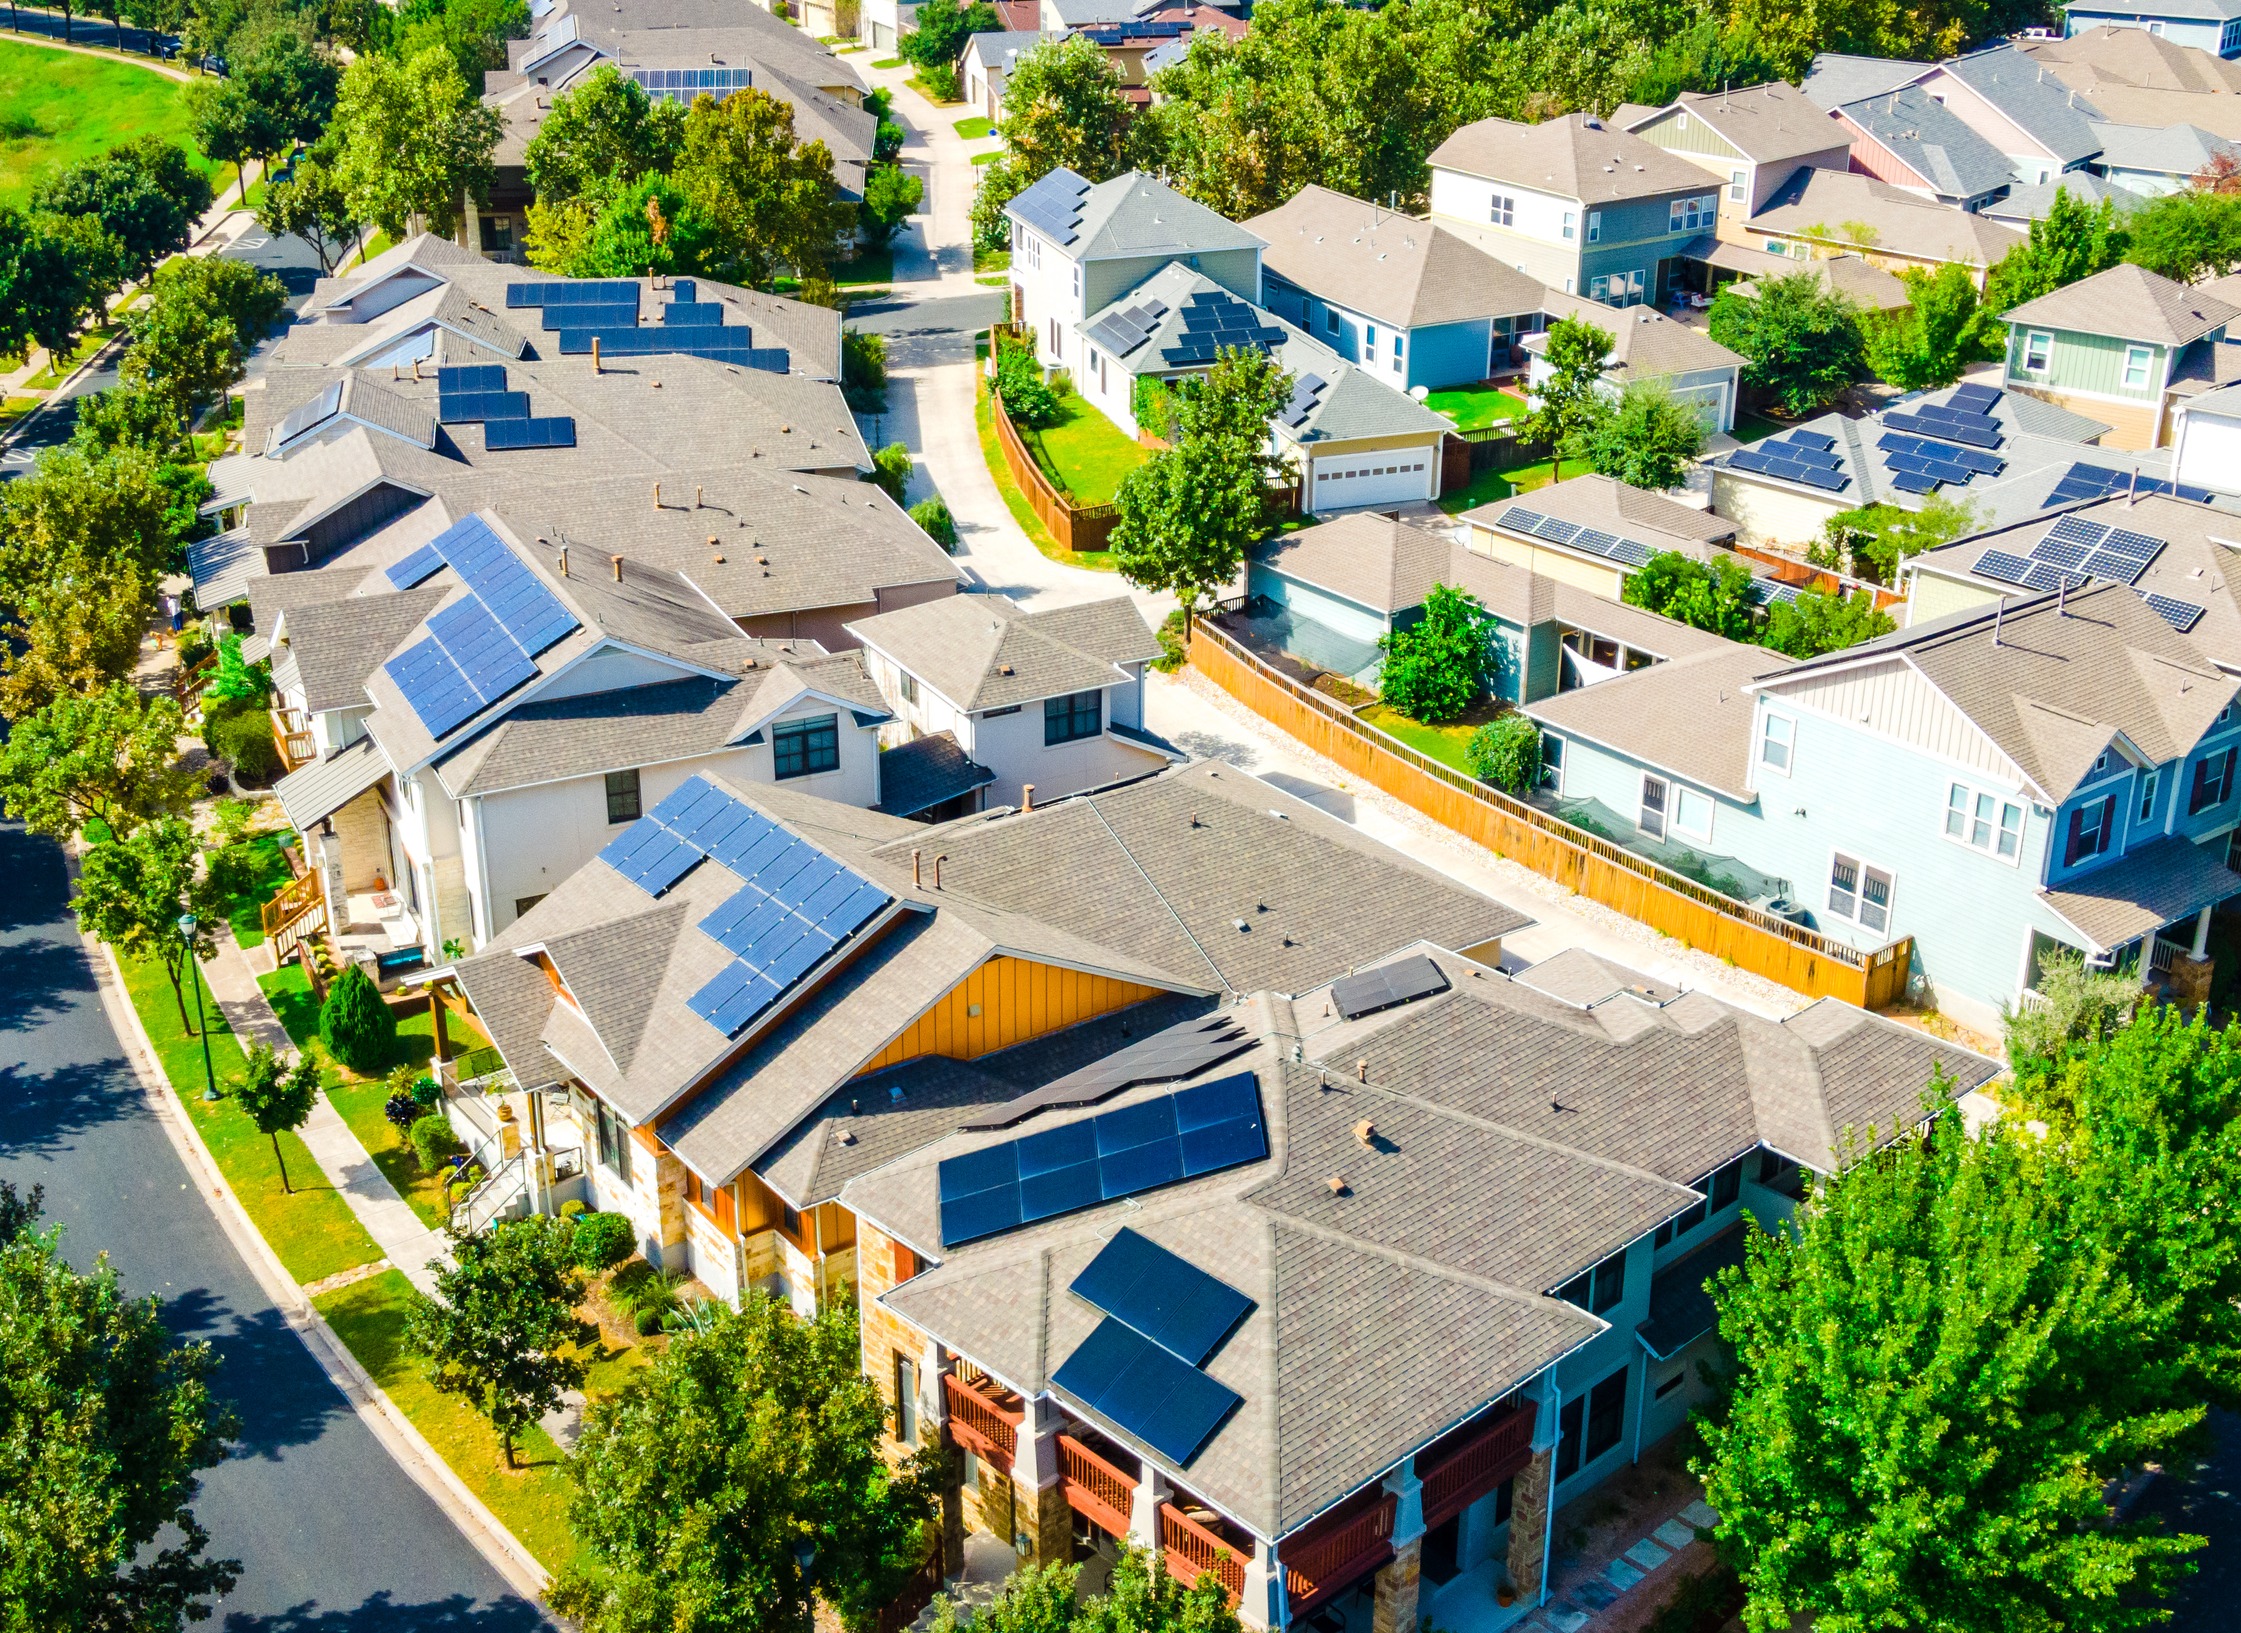 solar panels on the roofs of houses in a neighborhood